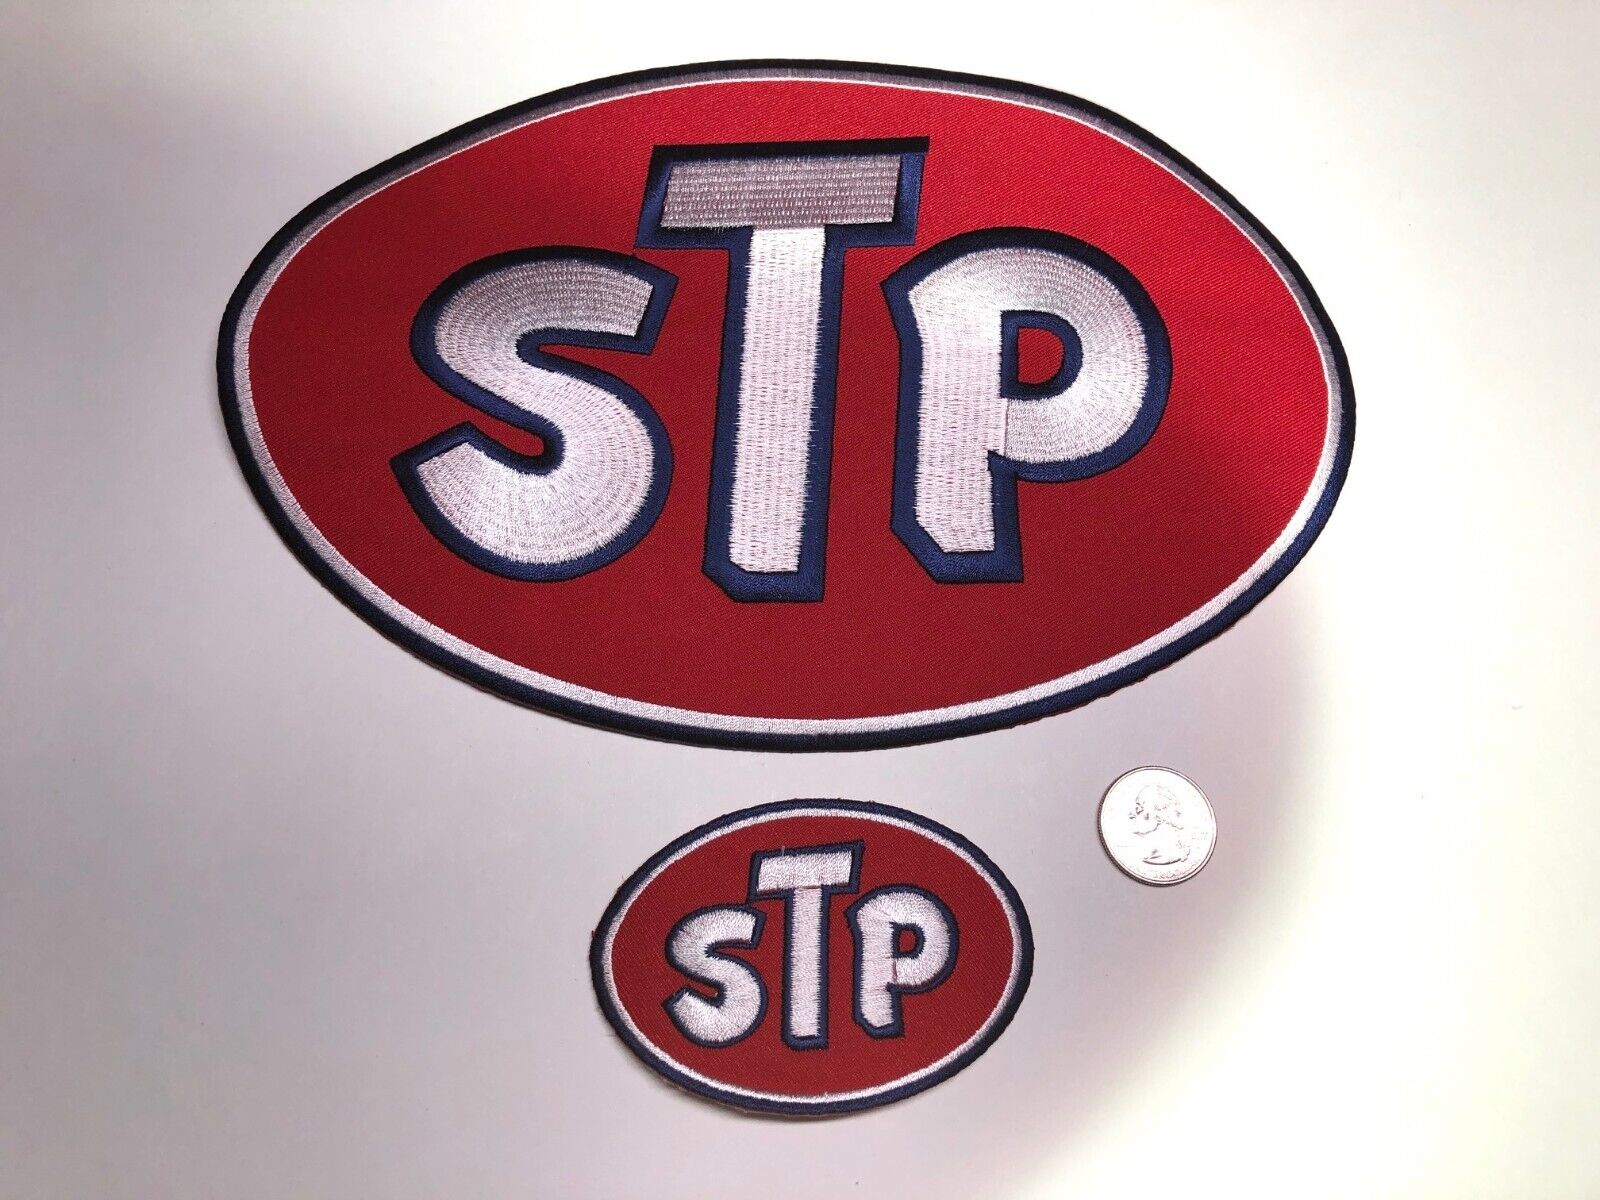 STP OIL TREATMENT  LARGE & SMALL EMBROIDERED CLOTH PATCHES JACKET VEST